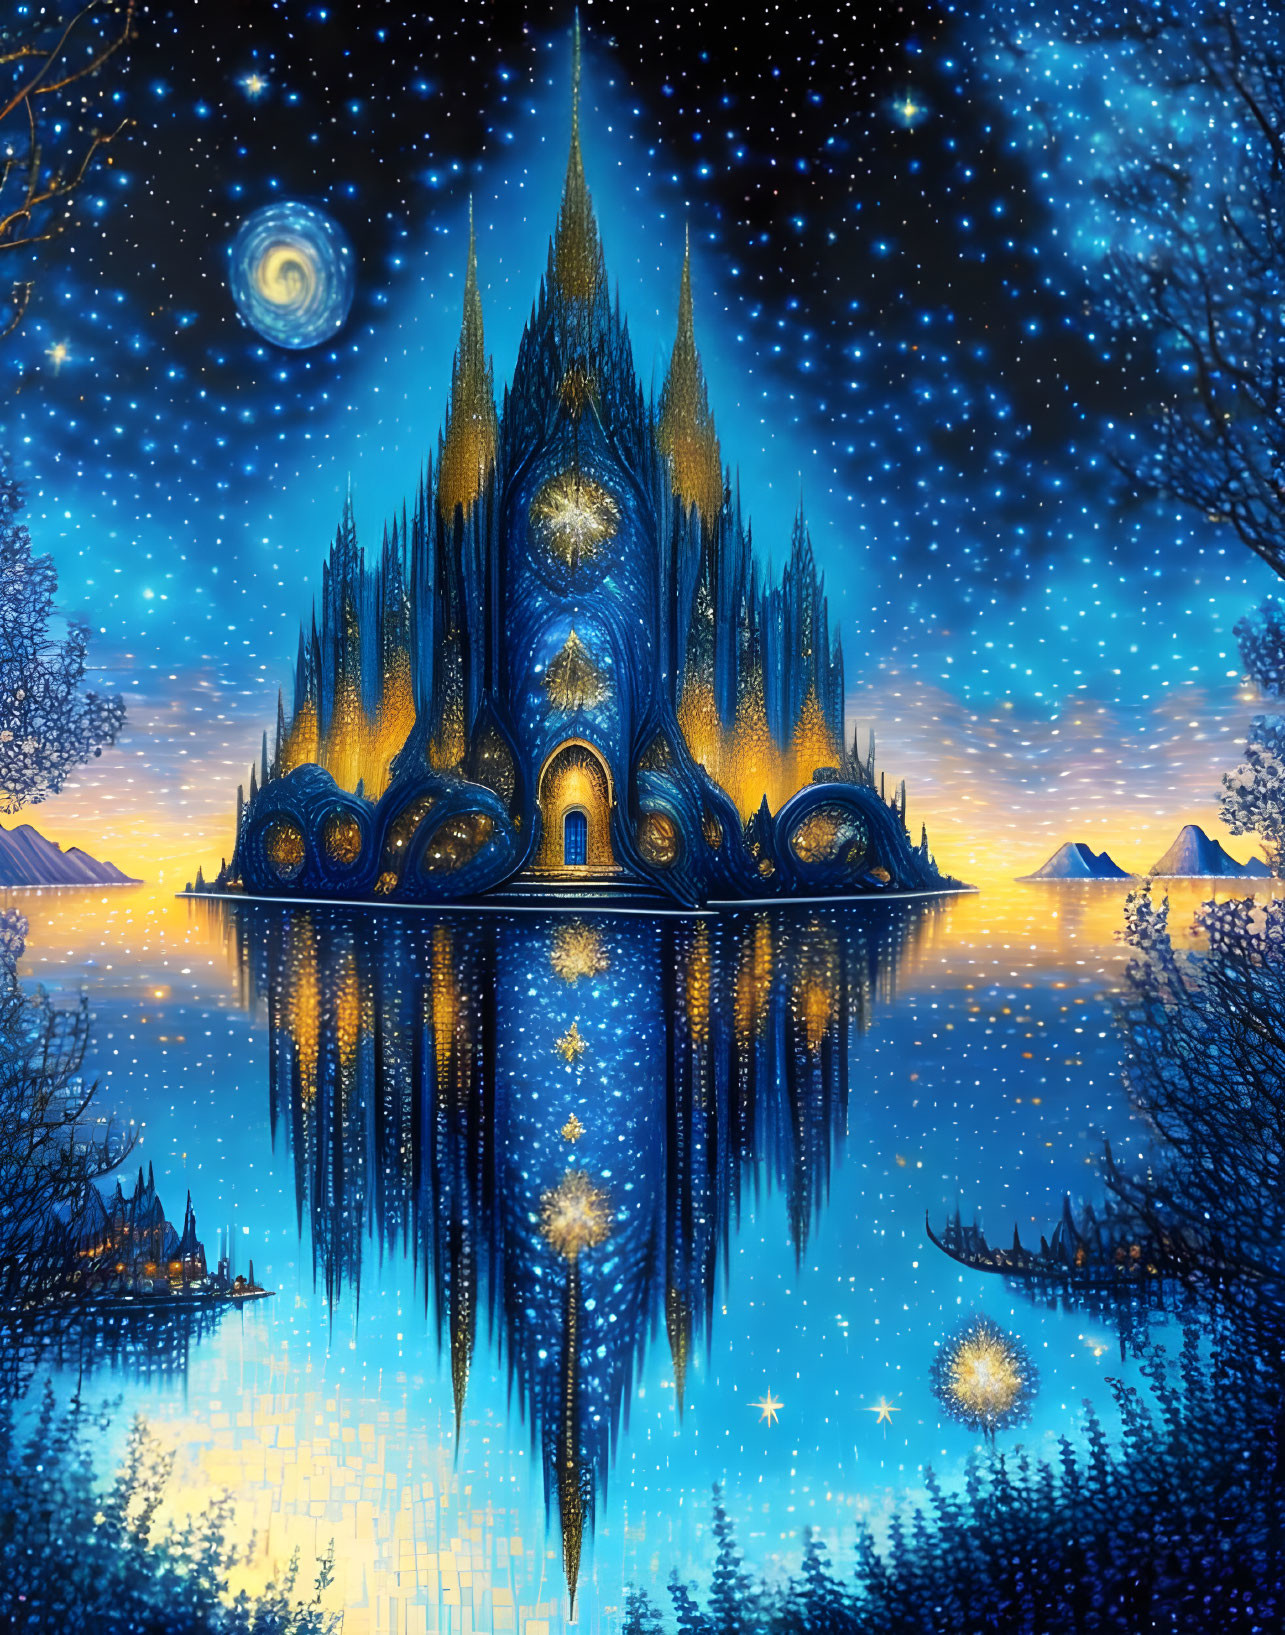 Enchanted castle with spires under starry night sky reflected on serene lake.